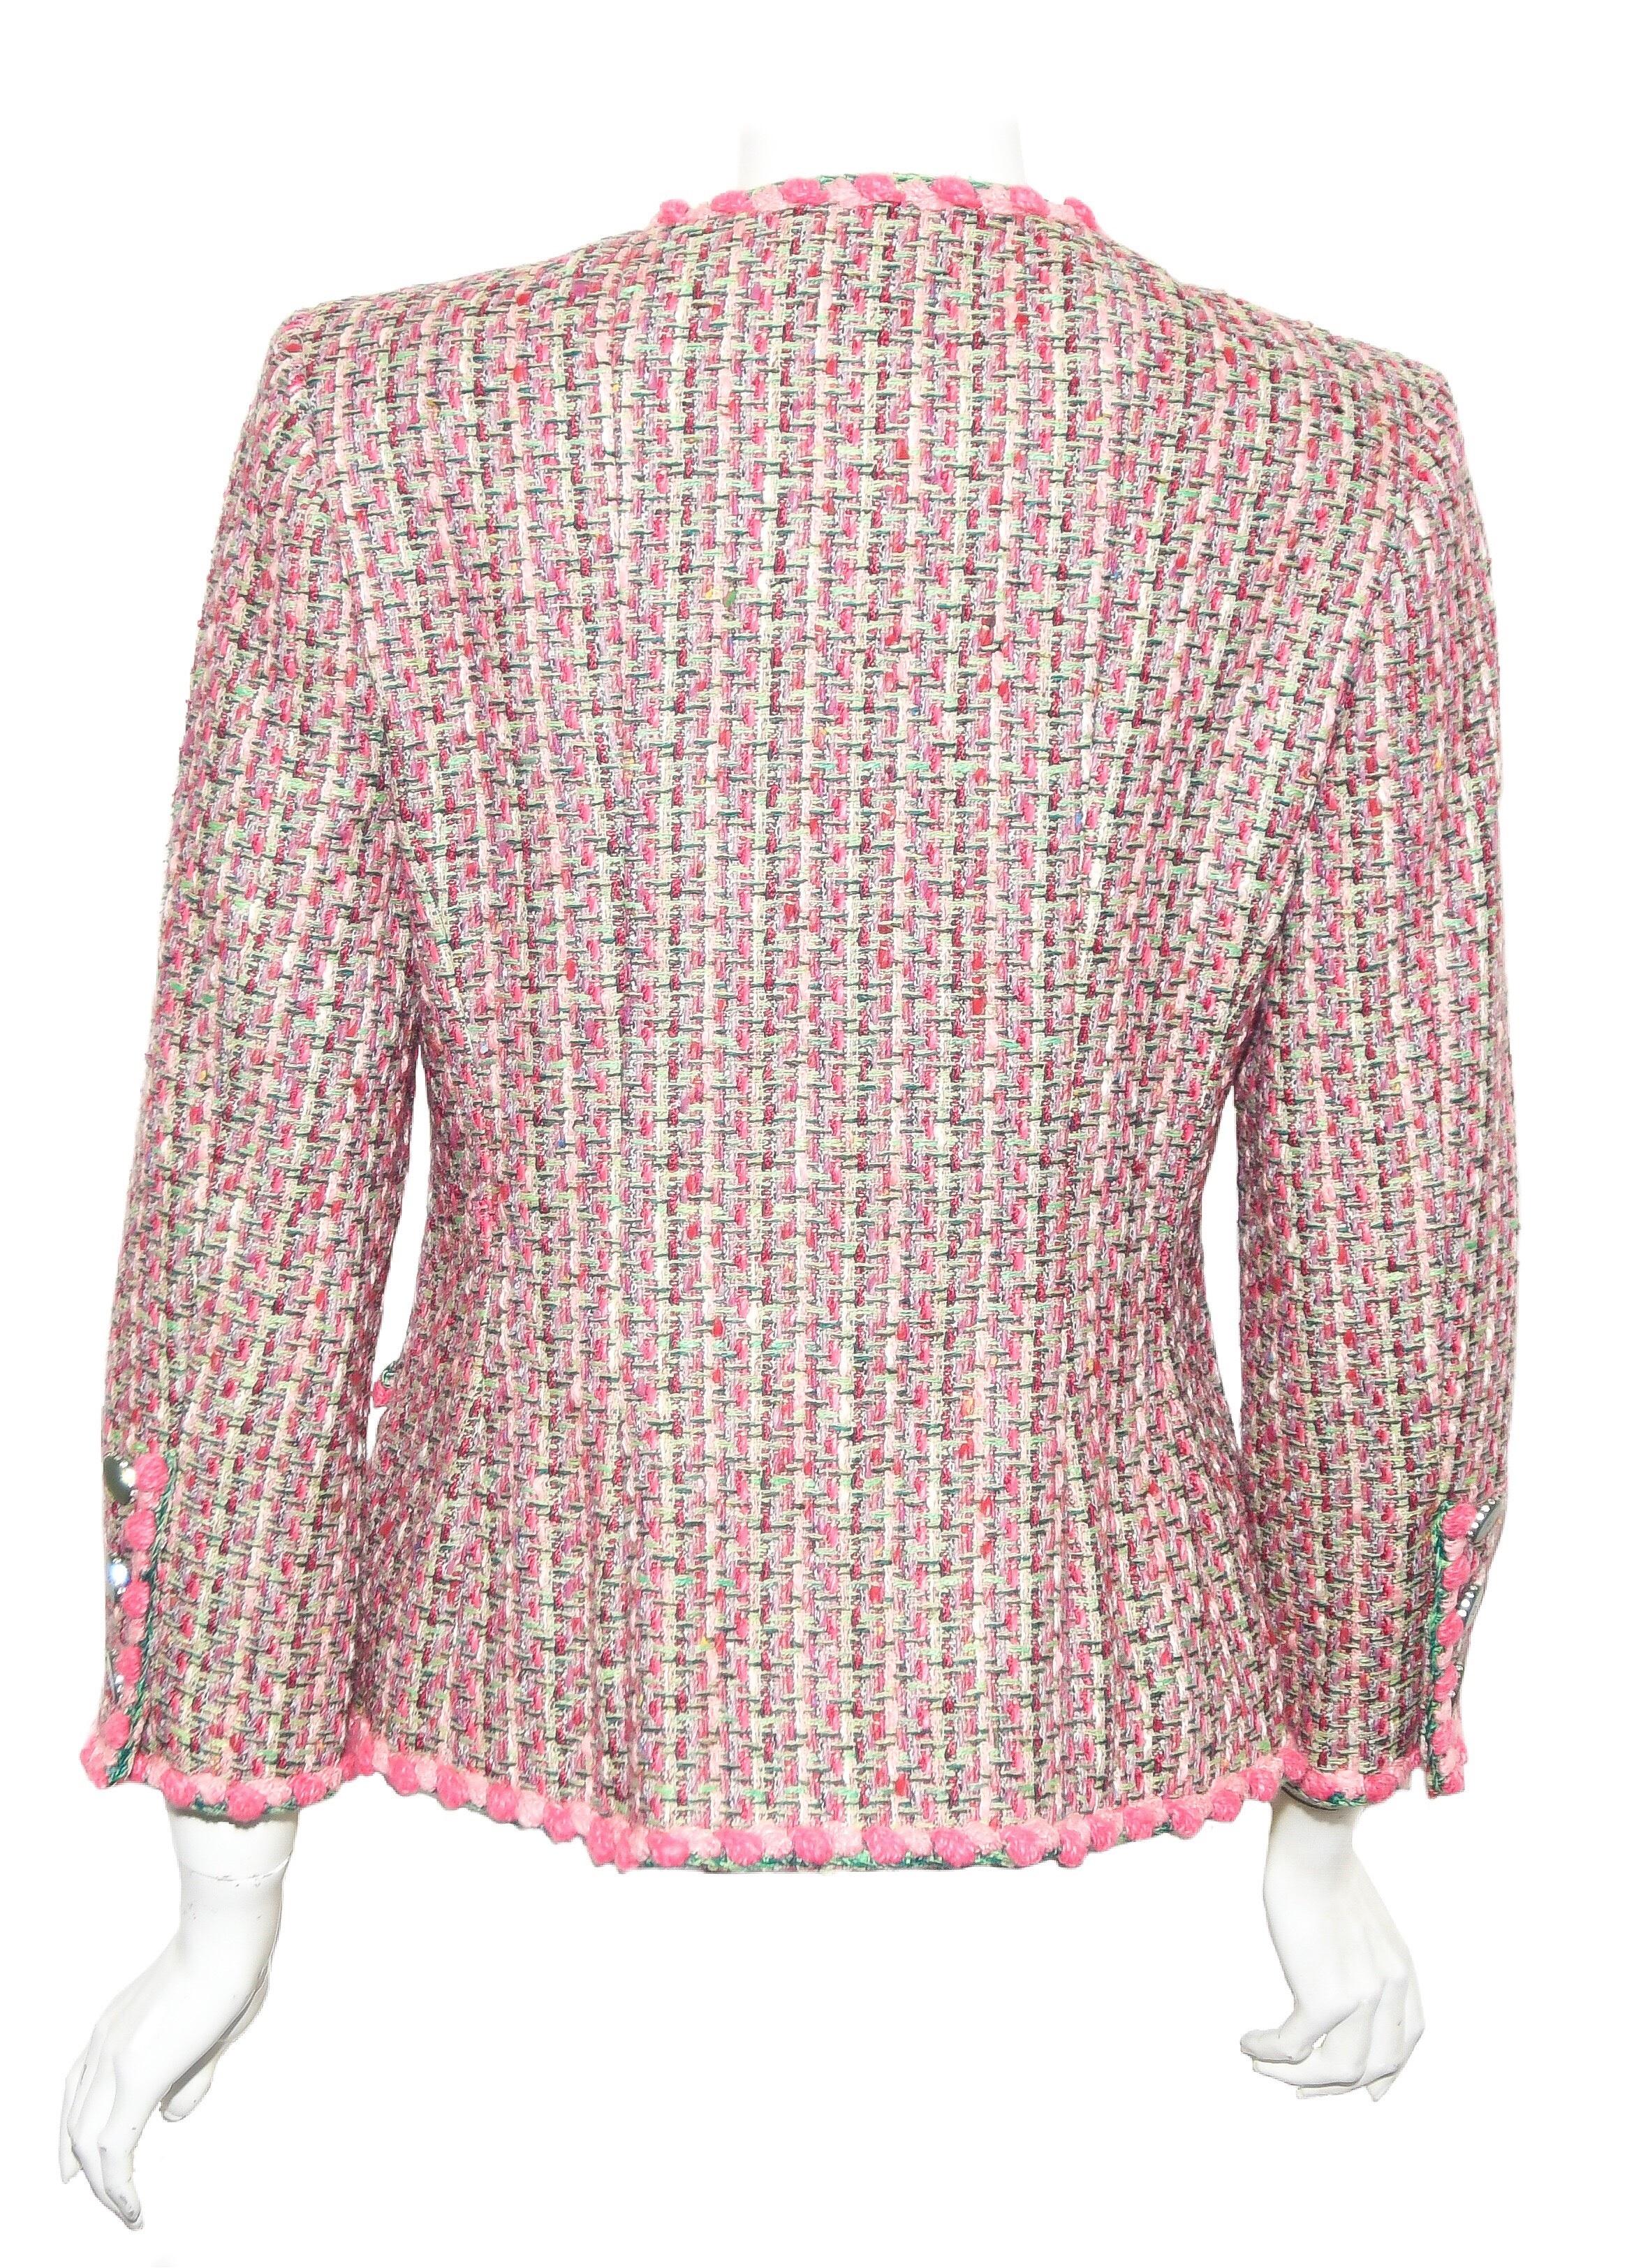 Chanel Multi color tweed spring 2002 jacket features the accent on pink tones and pink crocheted trim.  The pink trim incorporates 2 tones of pink crocheted rosettes throughout the jacket, on the cuffs, four pockets, around the neckline, down the